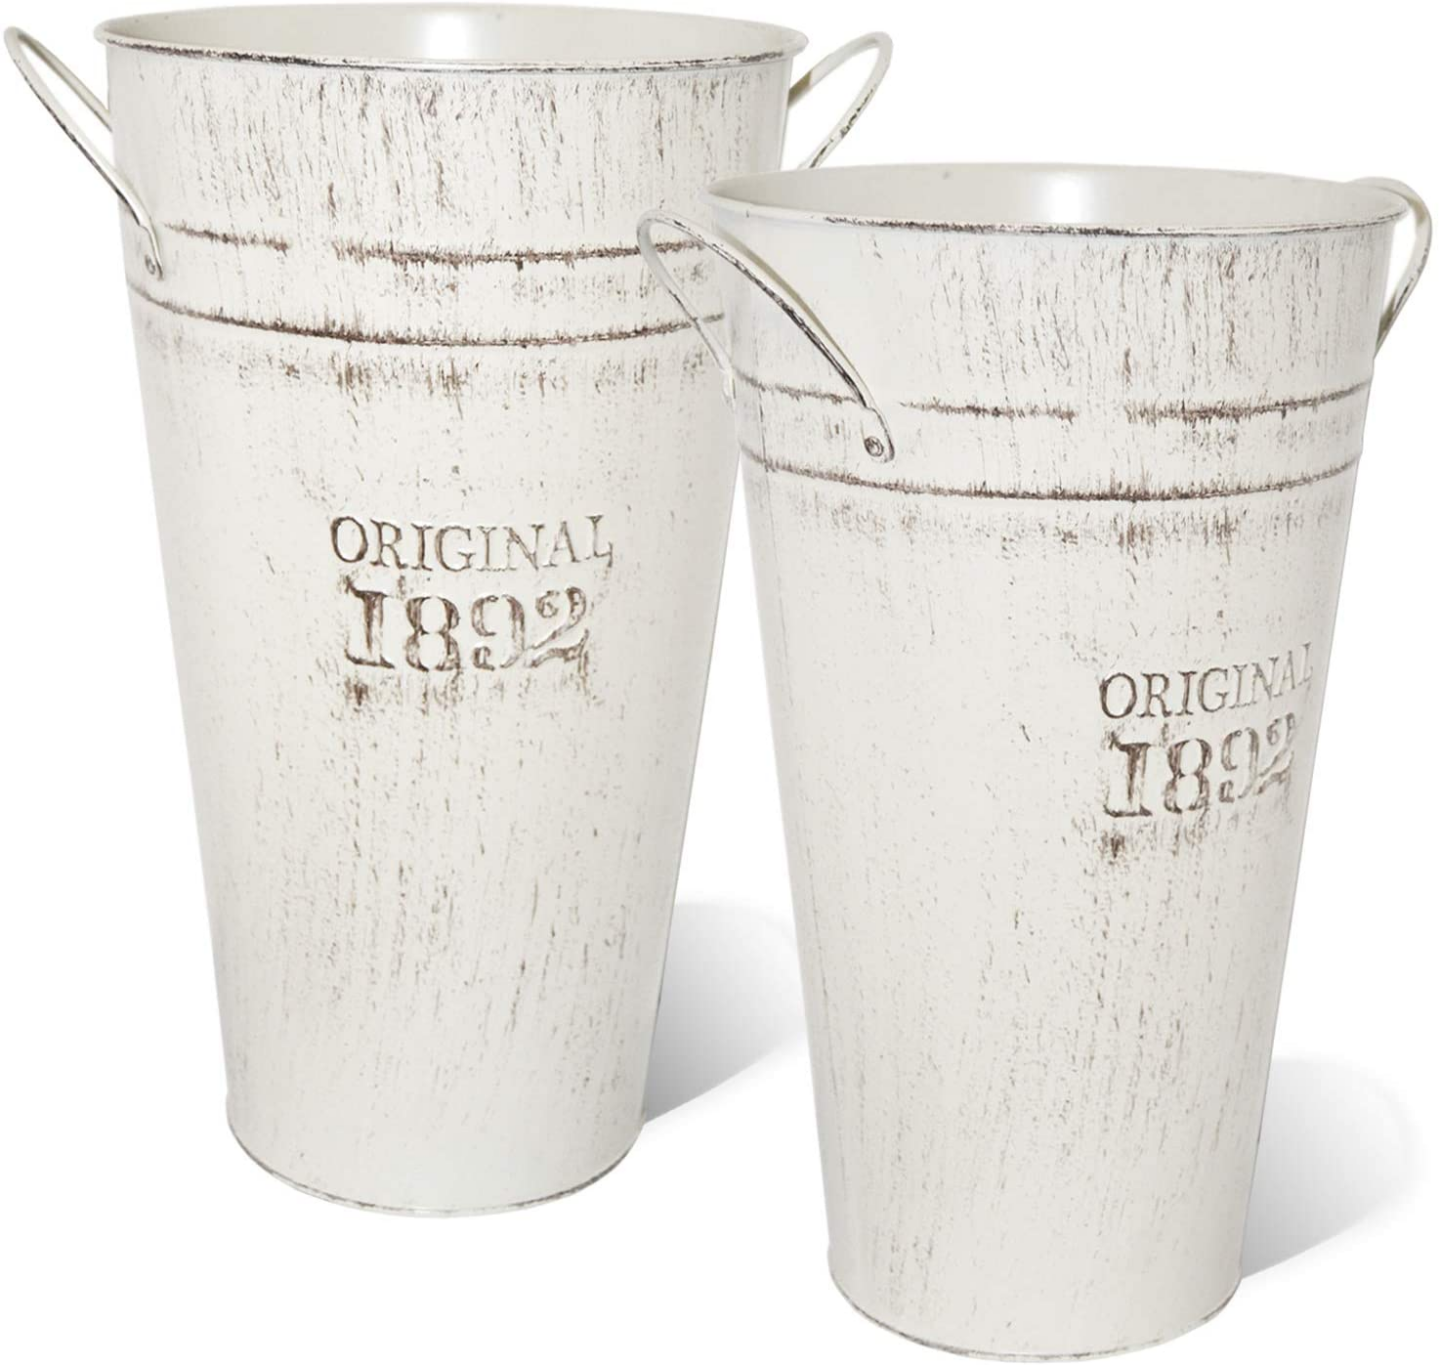 French farmhouse galvanized bucket vase set makes a modern country rustic statement.